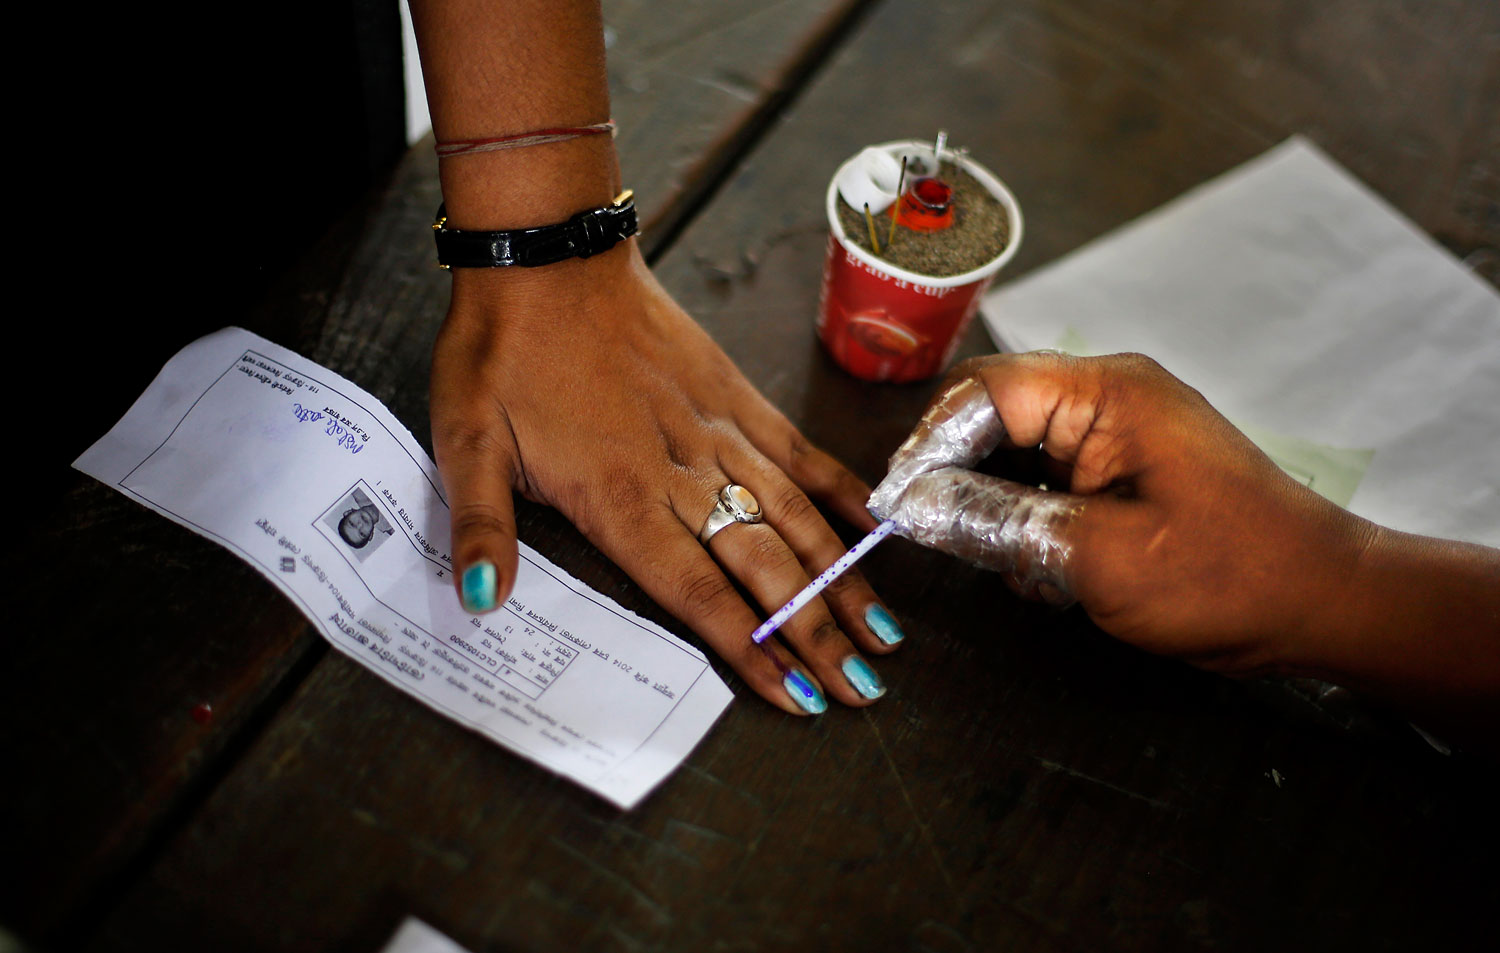 An Indian election officer applies an indelible ink mark on the finger of a woman during the first phase of elections in Dibrugarh, in the northeastern state of Assam, India, April 7, 2014.